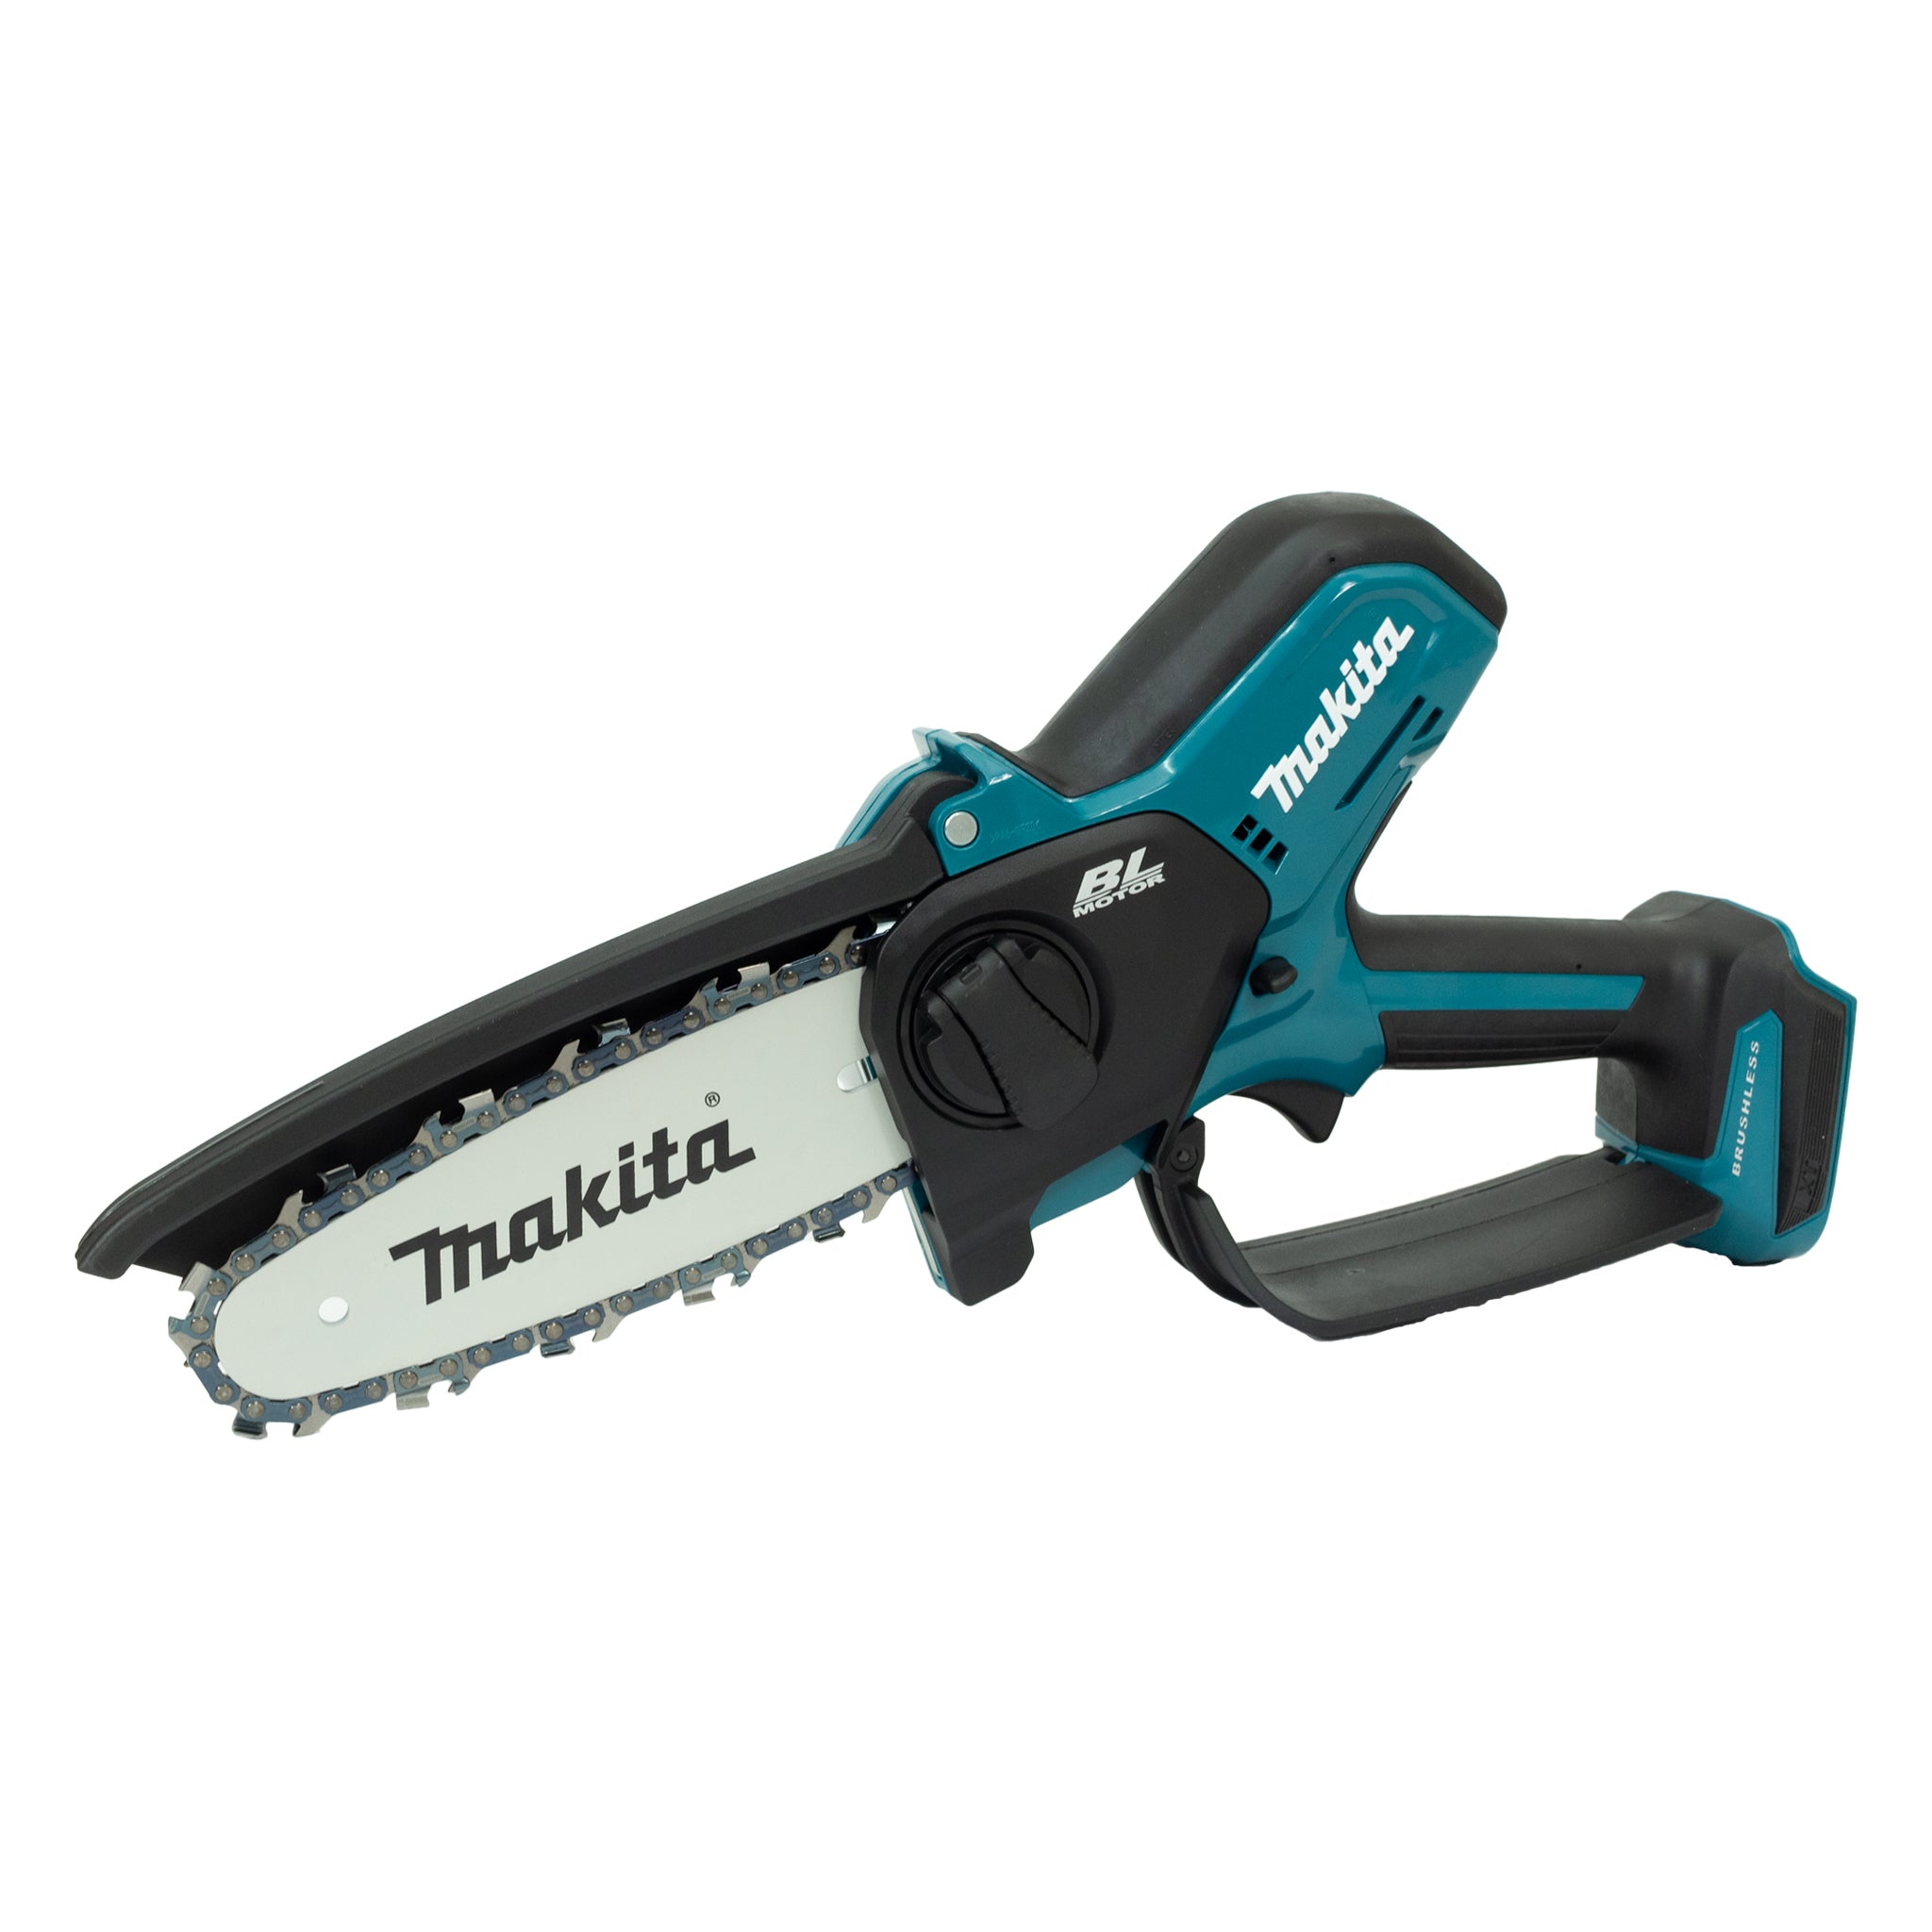 Makita 18V Rechargeable Handy Saw MUC101DZ (Body Only/Battery and Char